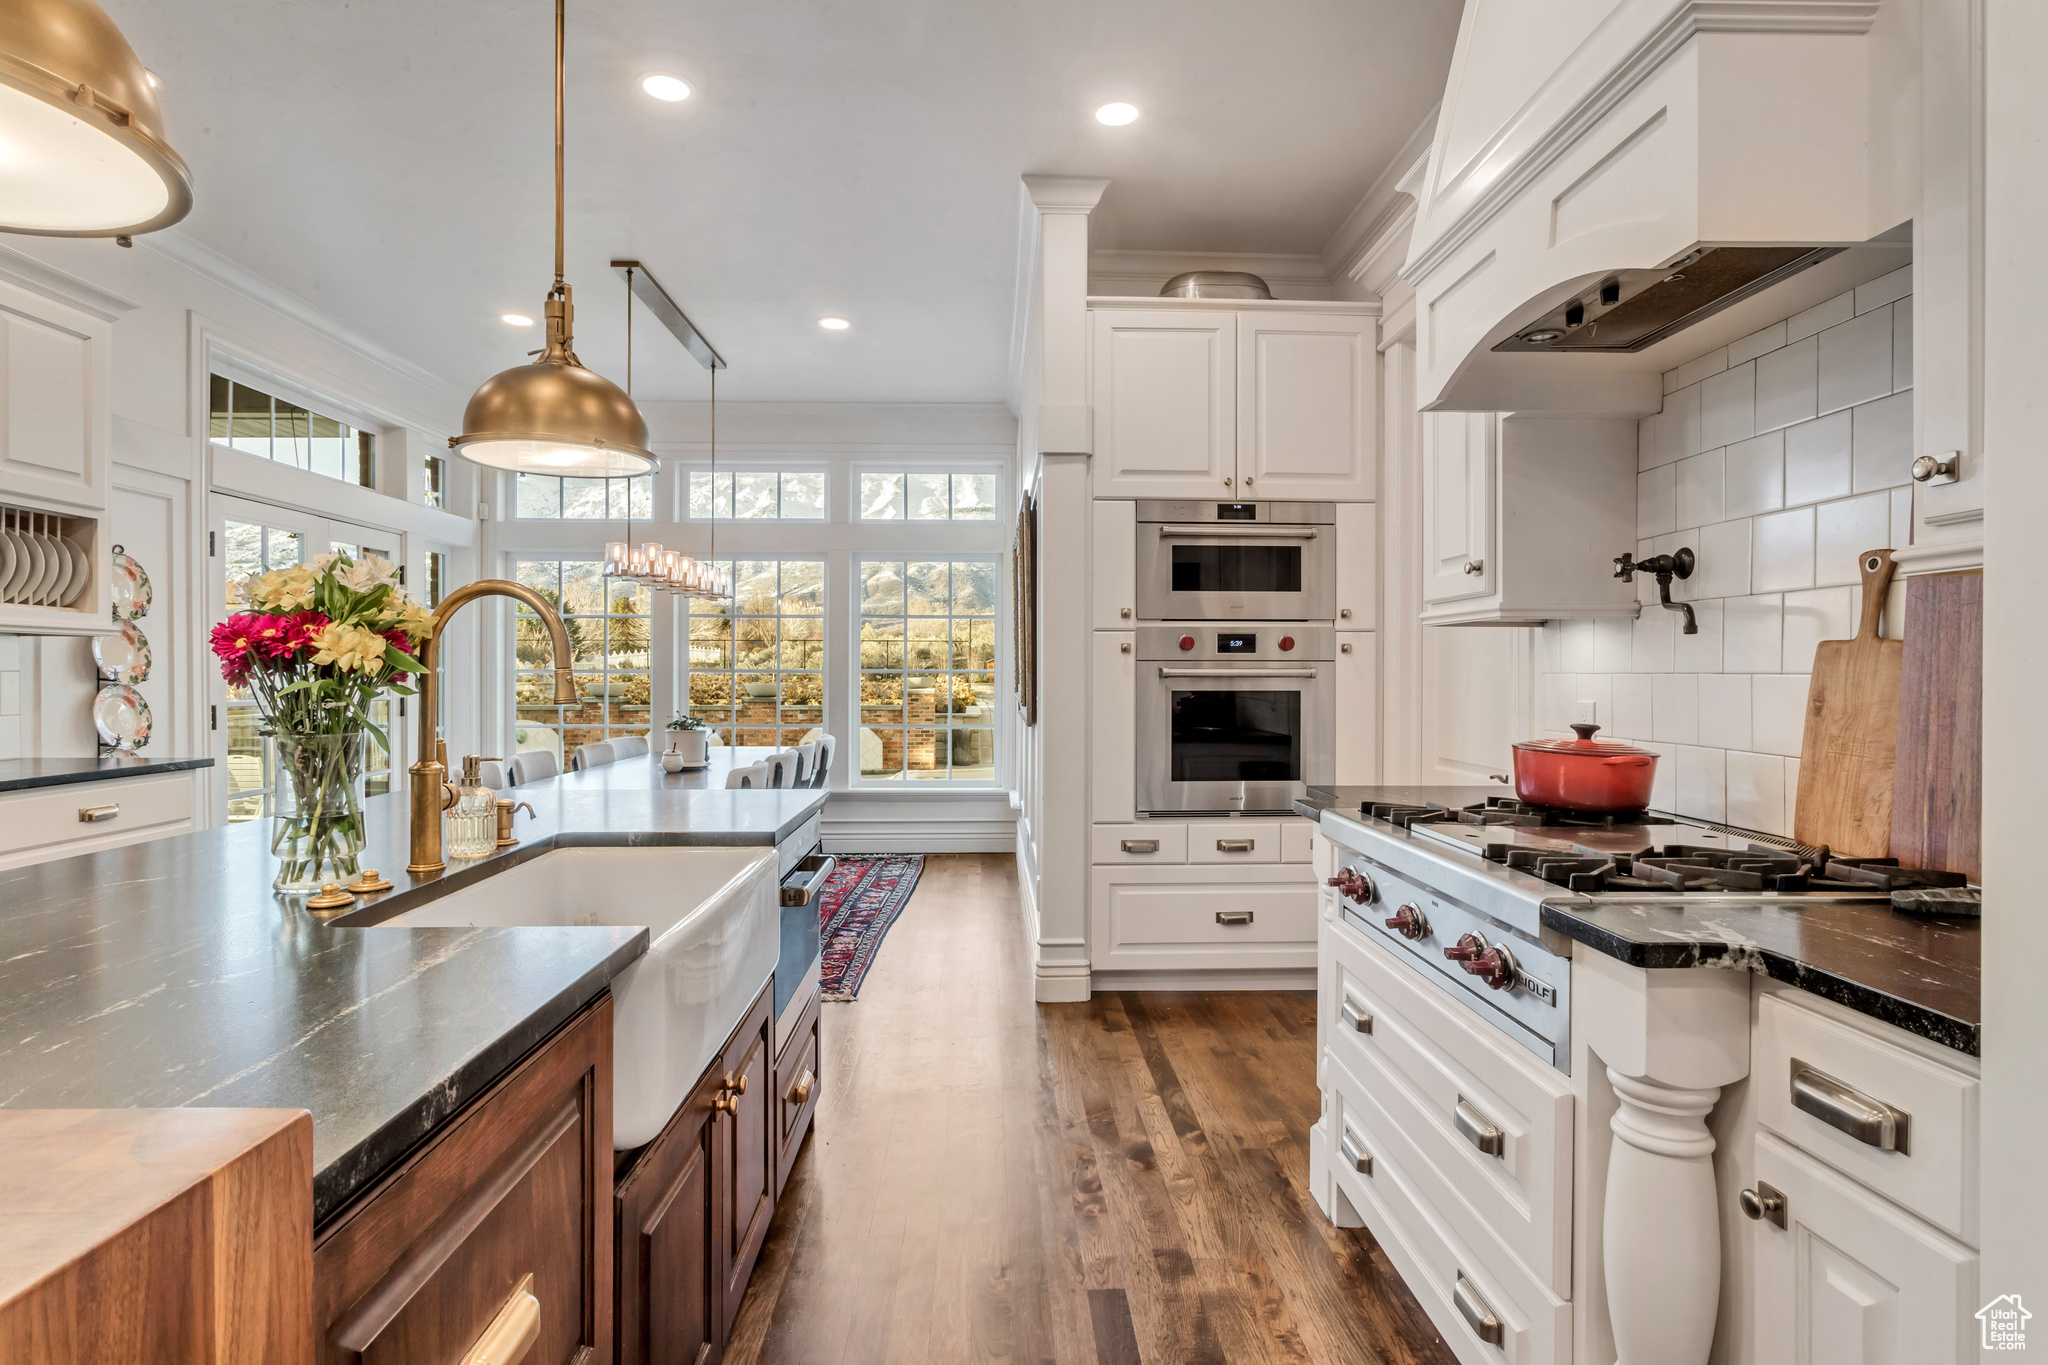 Kitchen with hanging light fixtures, tasteful backsplash, a healthy amount of sunlight, and white cabinets